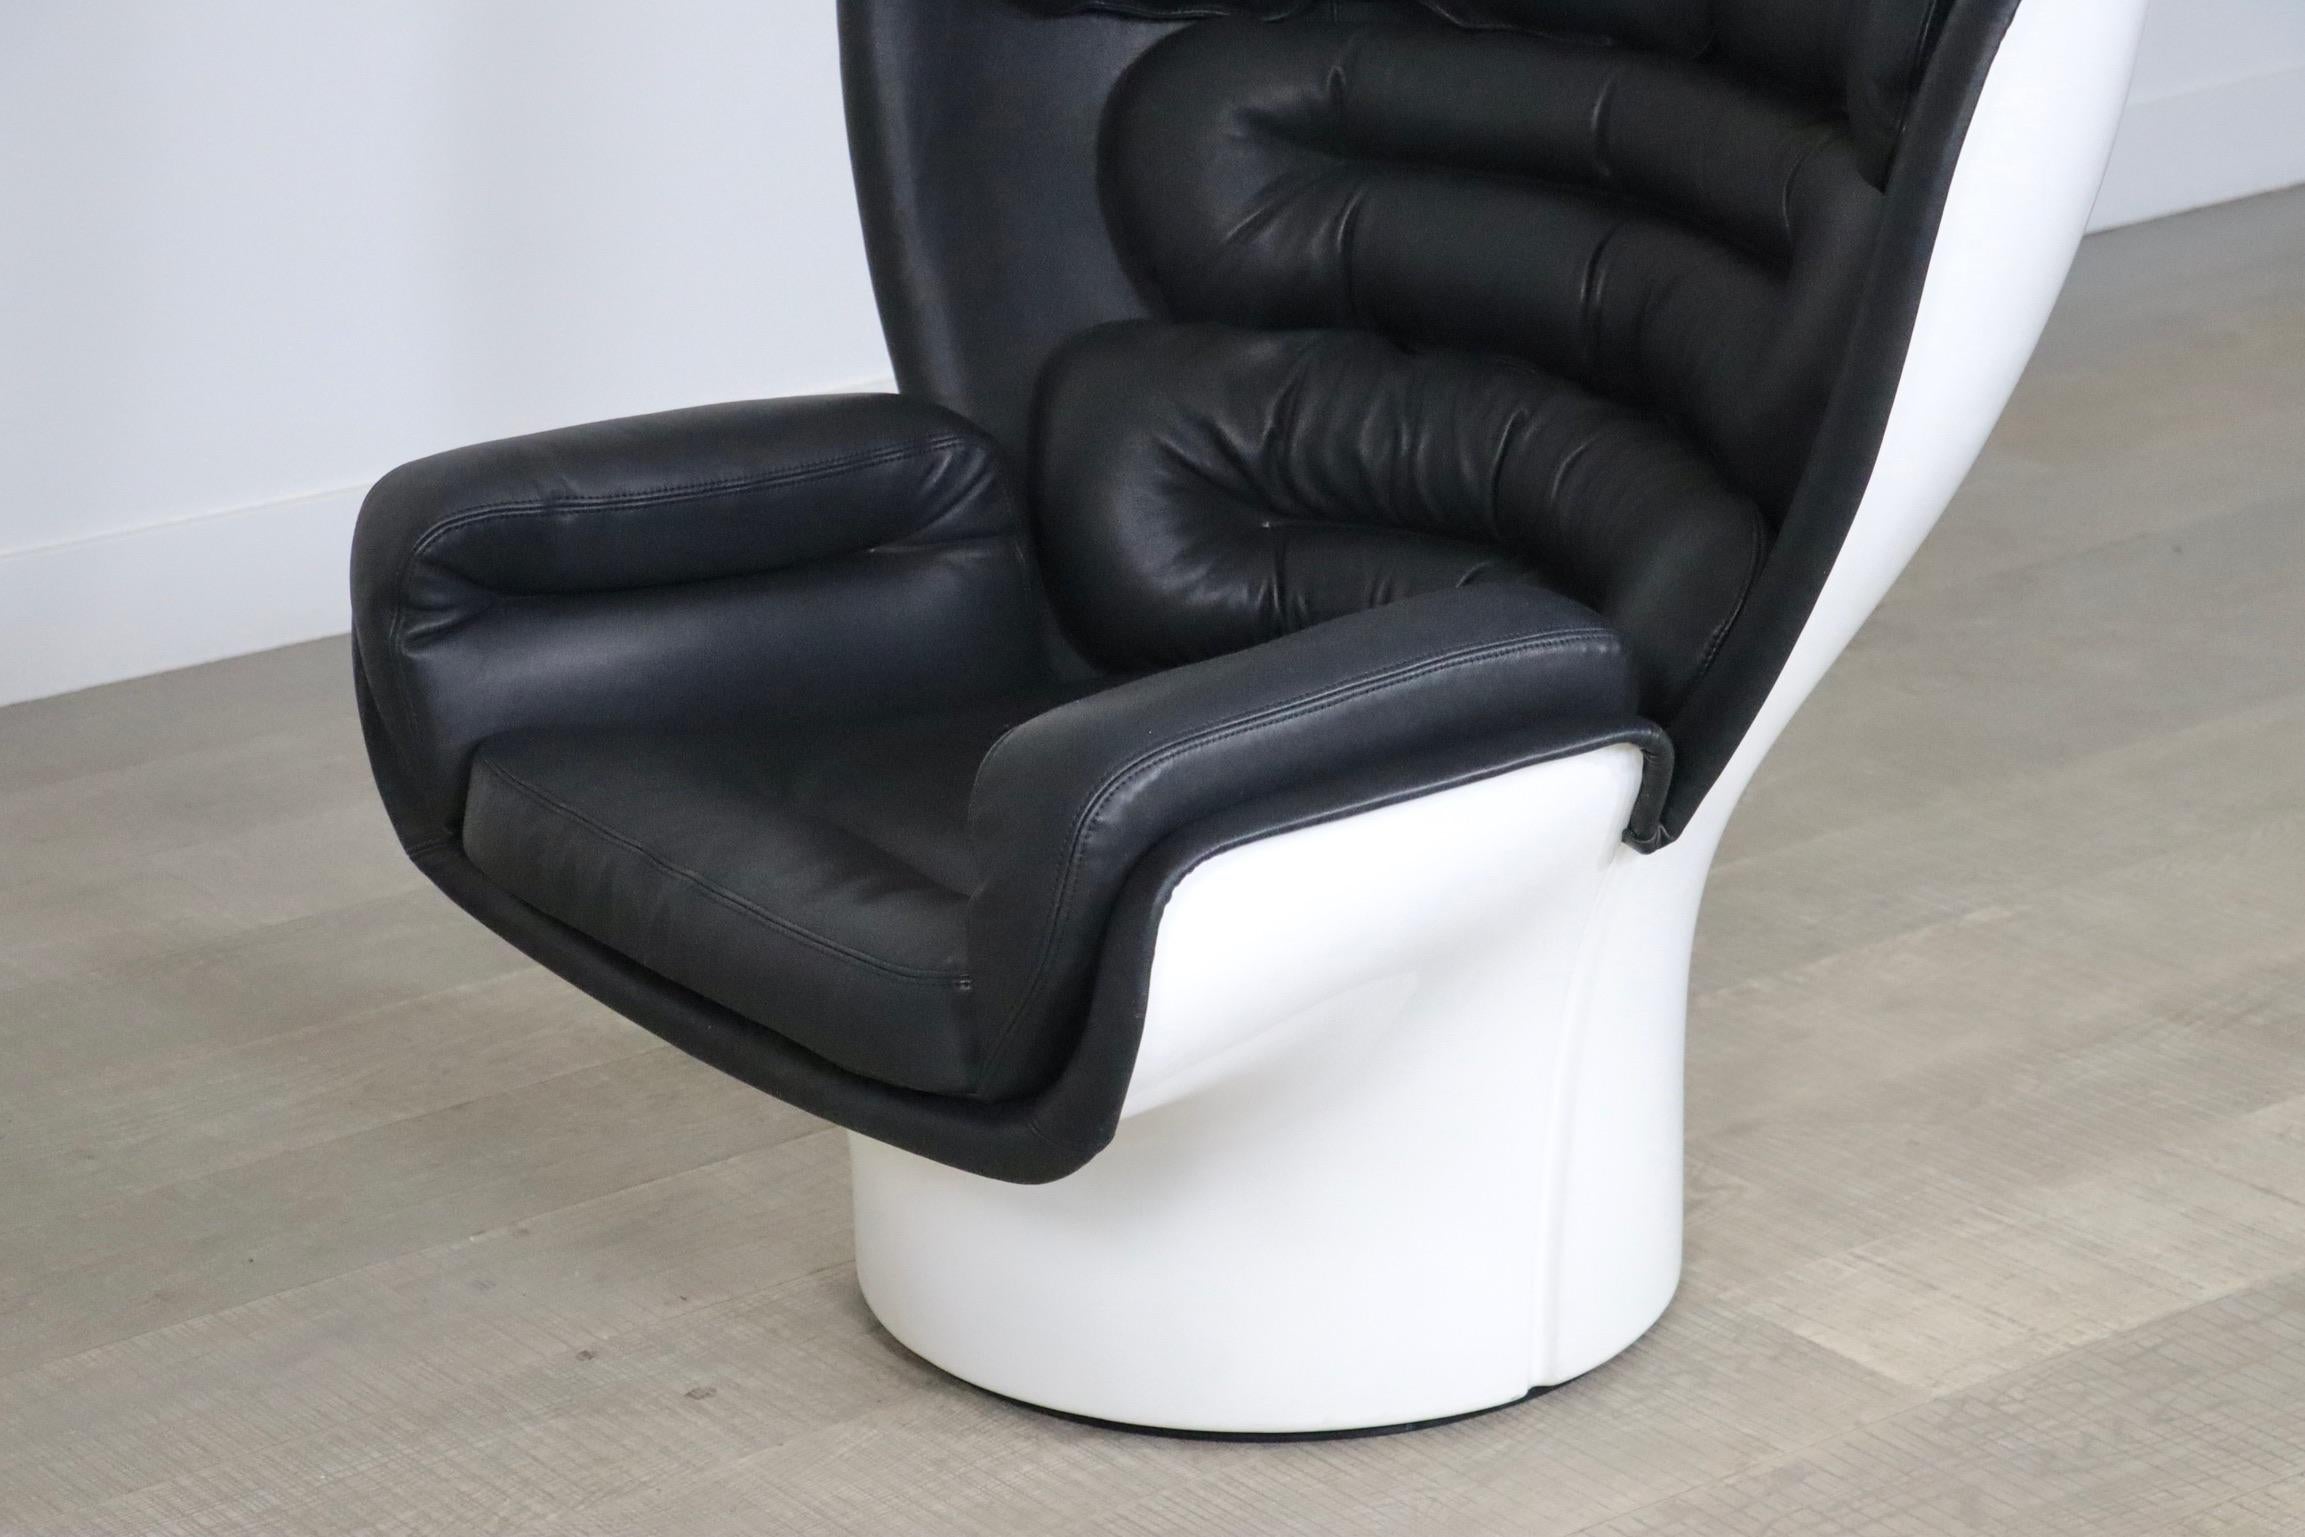 Mid-20th Century Elda Lounge Chair In Black Leather By Joe Colombo For Comfort Italy 1970s For Sale